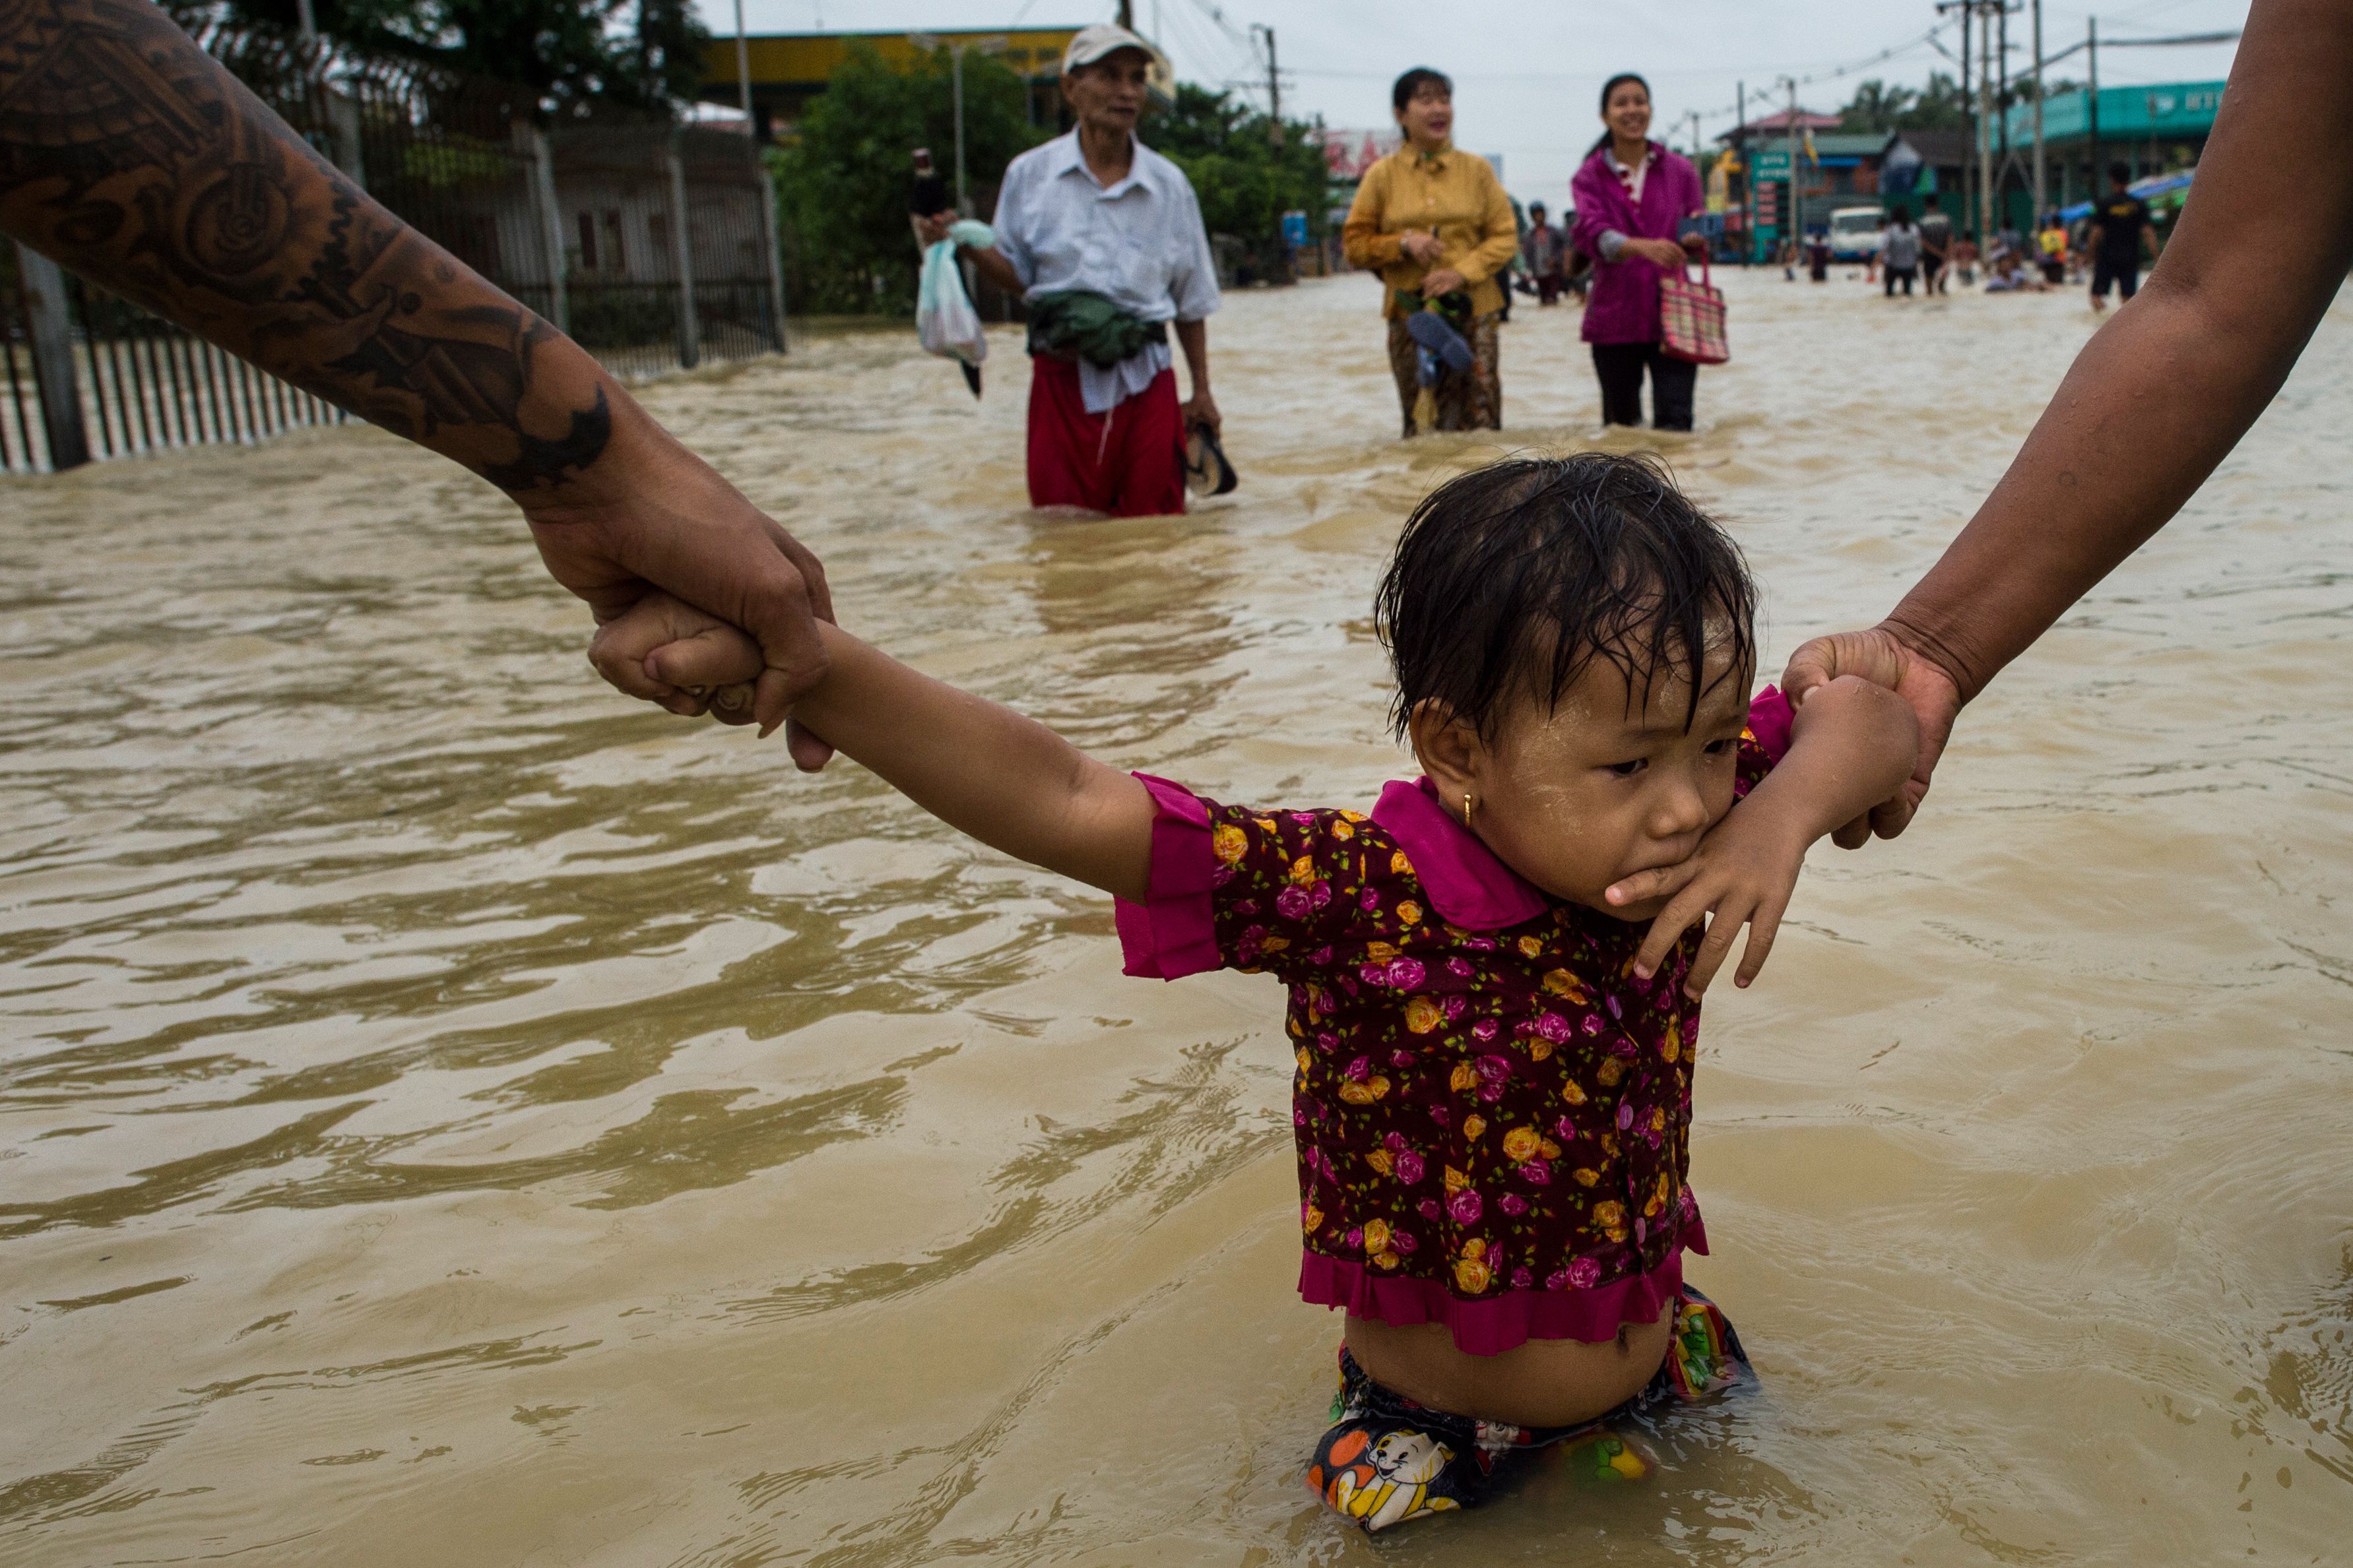 Residents hold onto a child as they walk through floodwaters in the Bago region, some 68 km away from Yangon, on July 29, 2018. (YE AUNG THU—AFP/Getty Images)